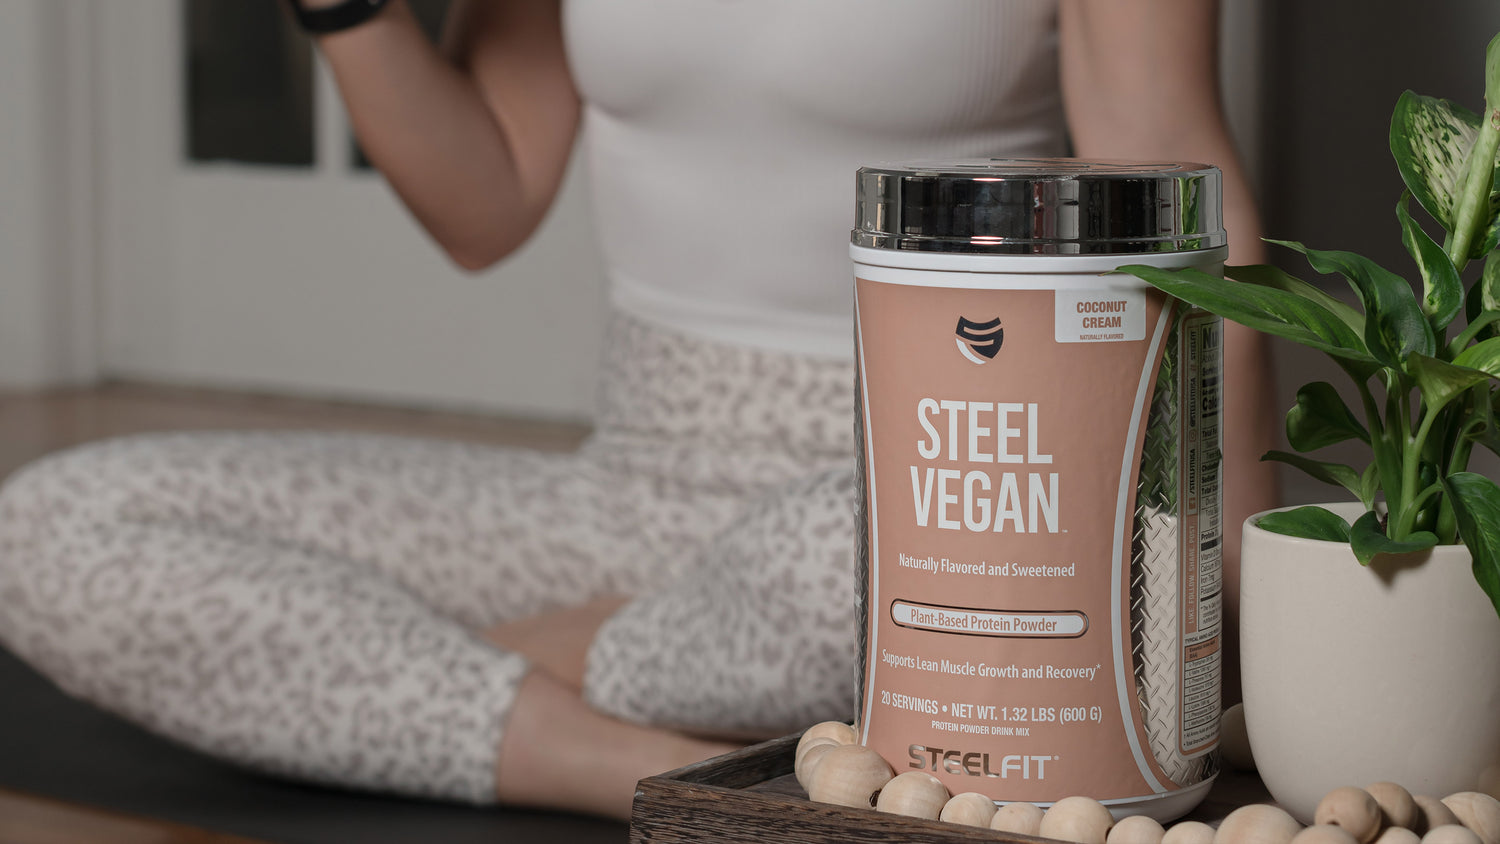 Steel Vegan delicious plant based protein powder with 20g of protein per serving